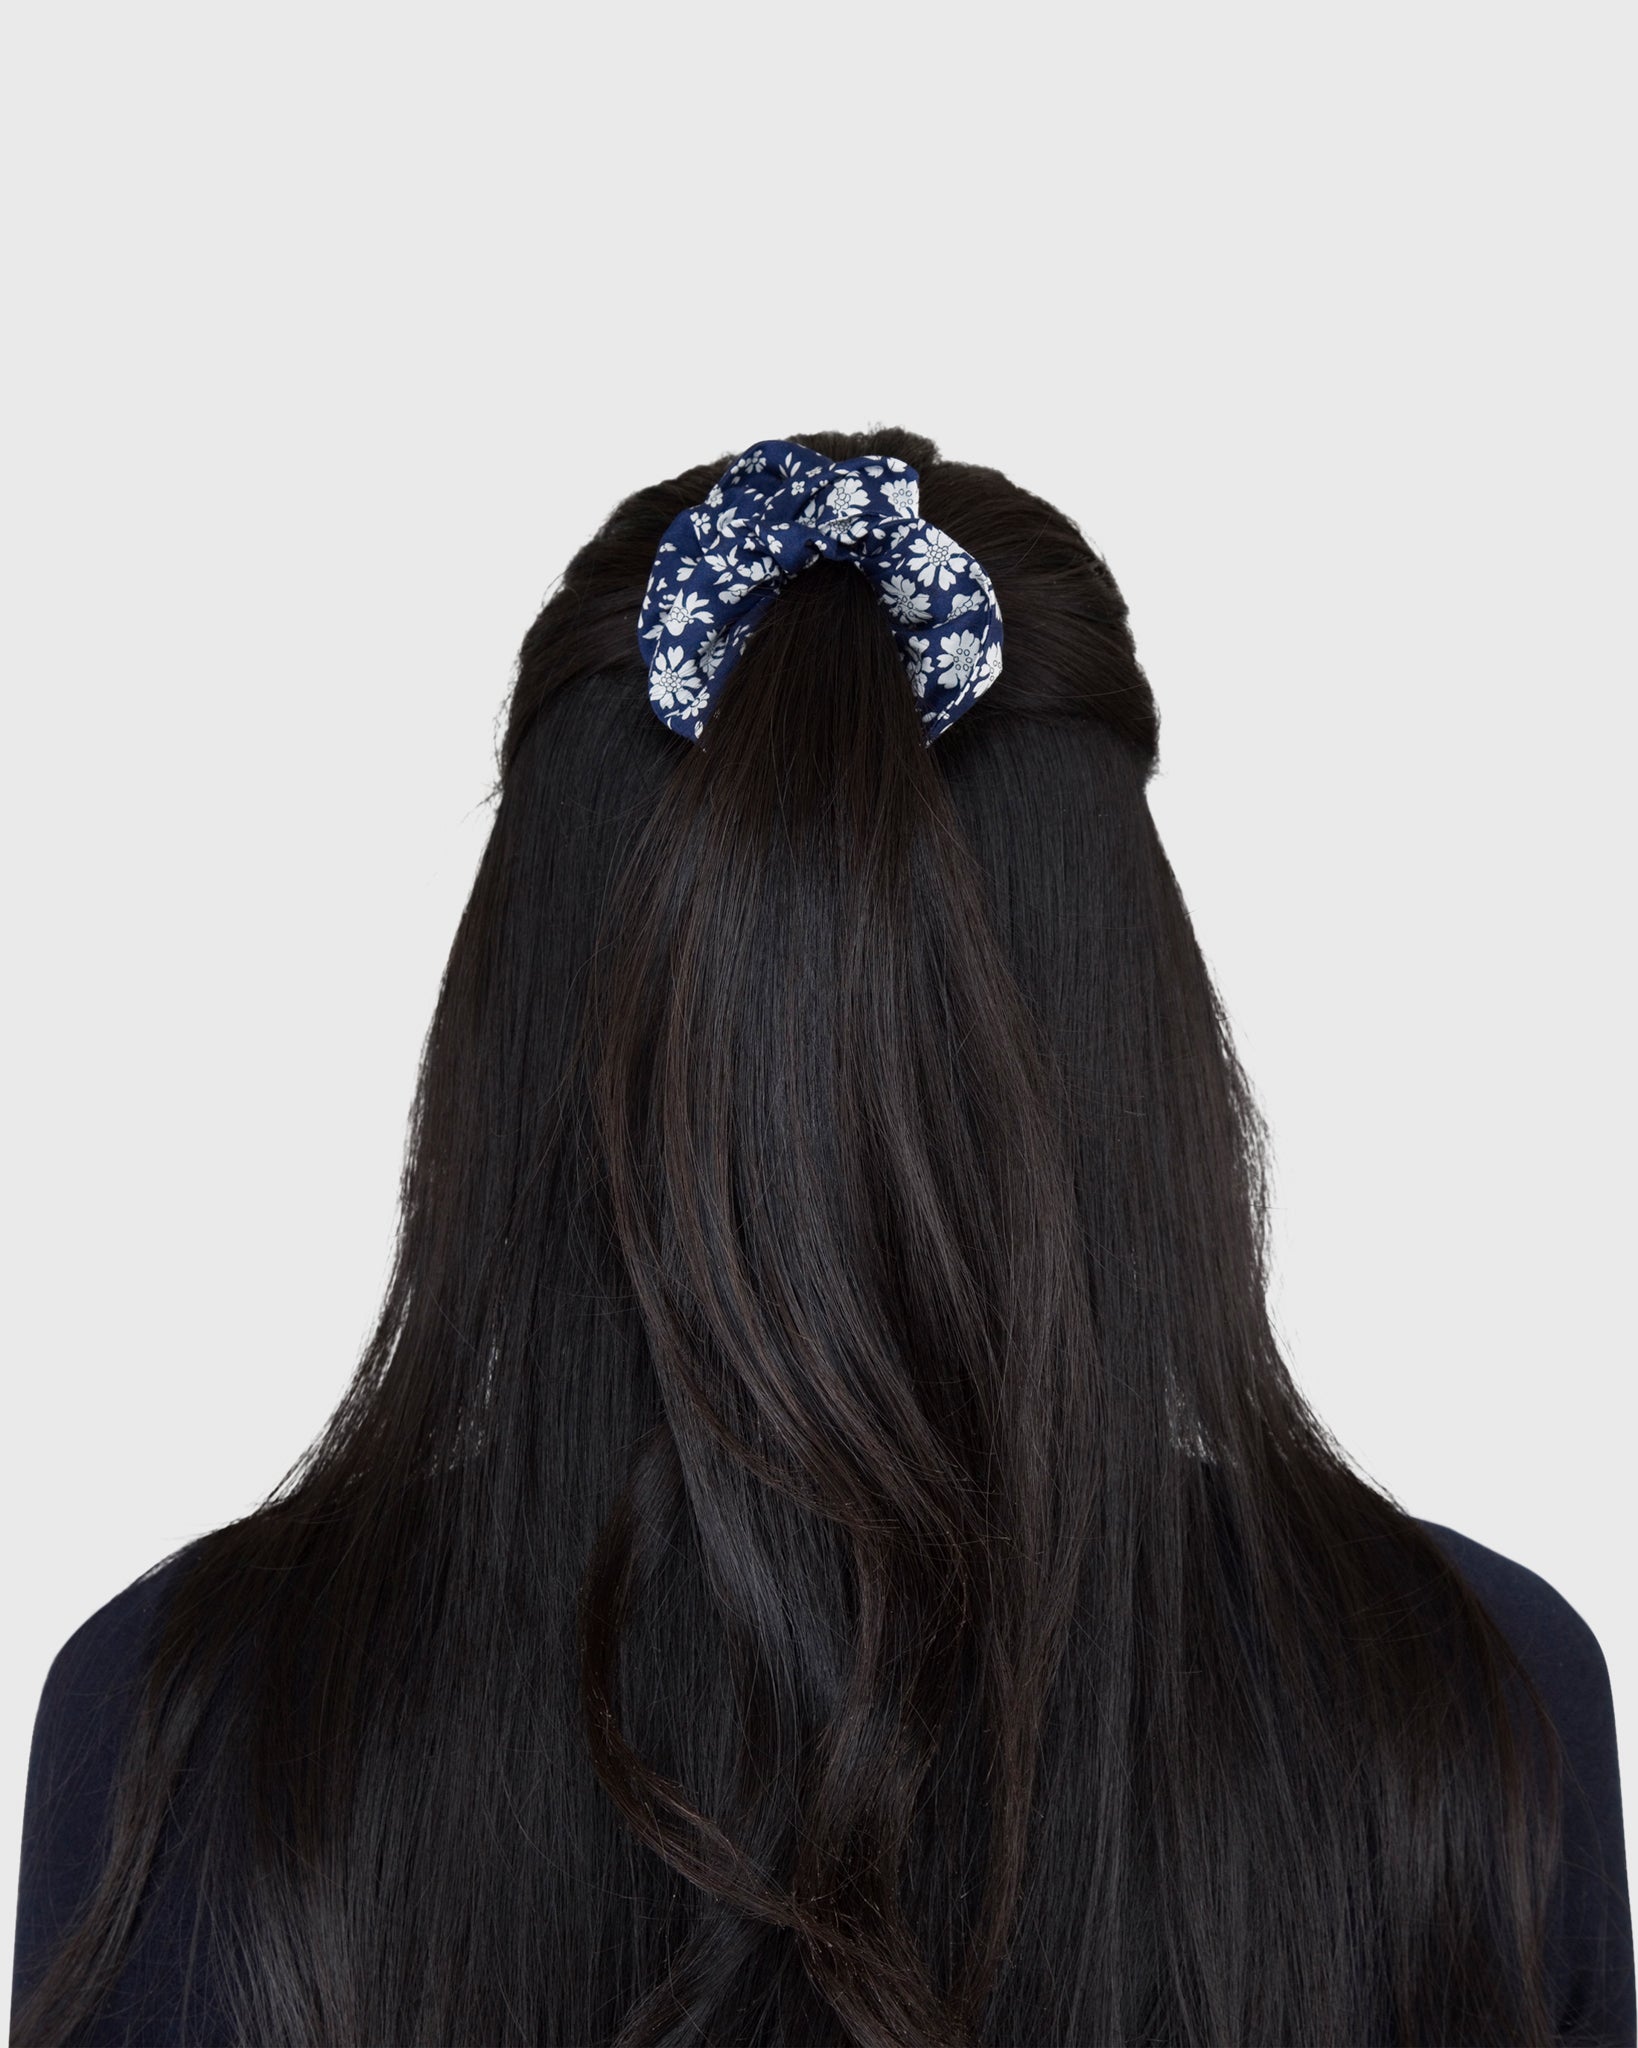 Large Scrunchie Navy Capel Liberty Fabric